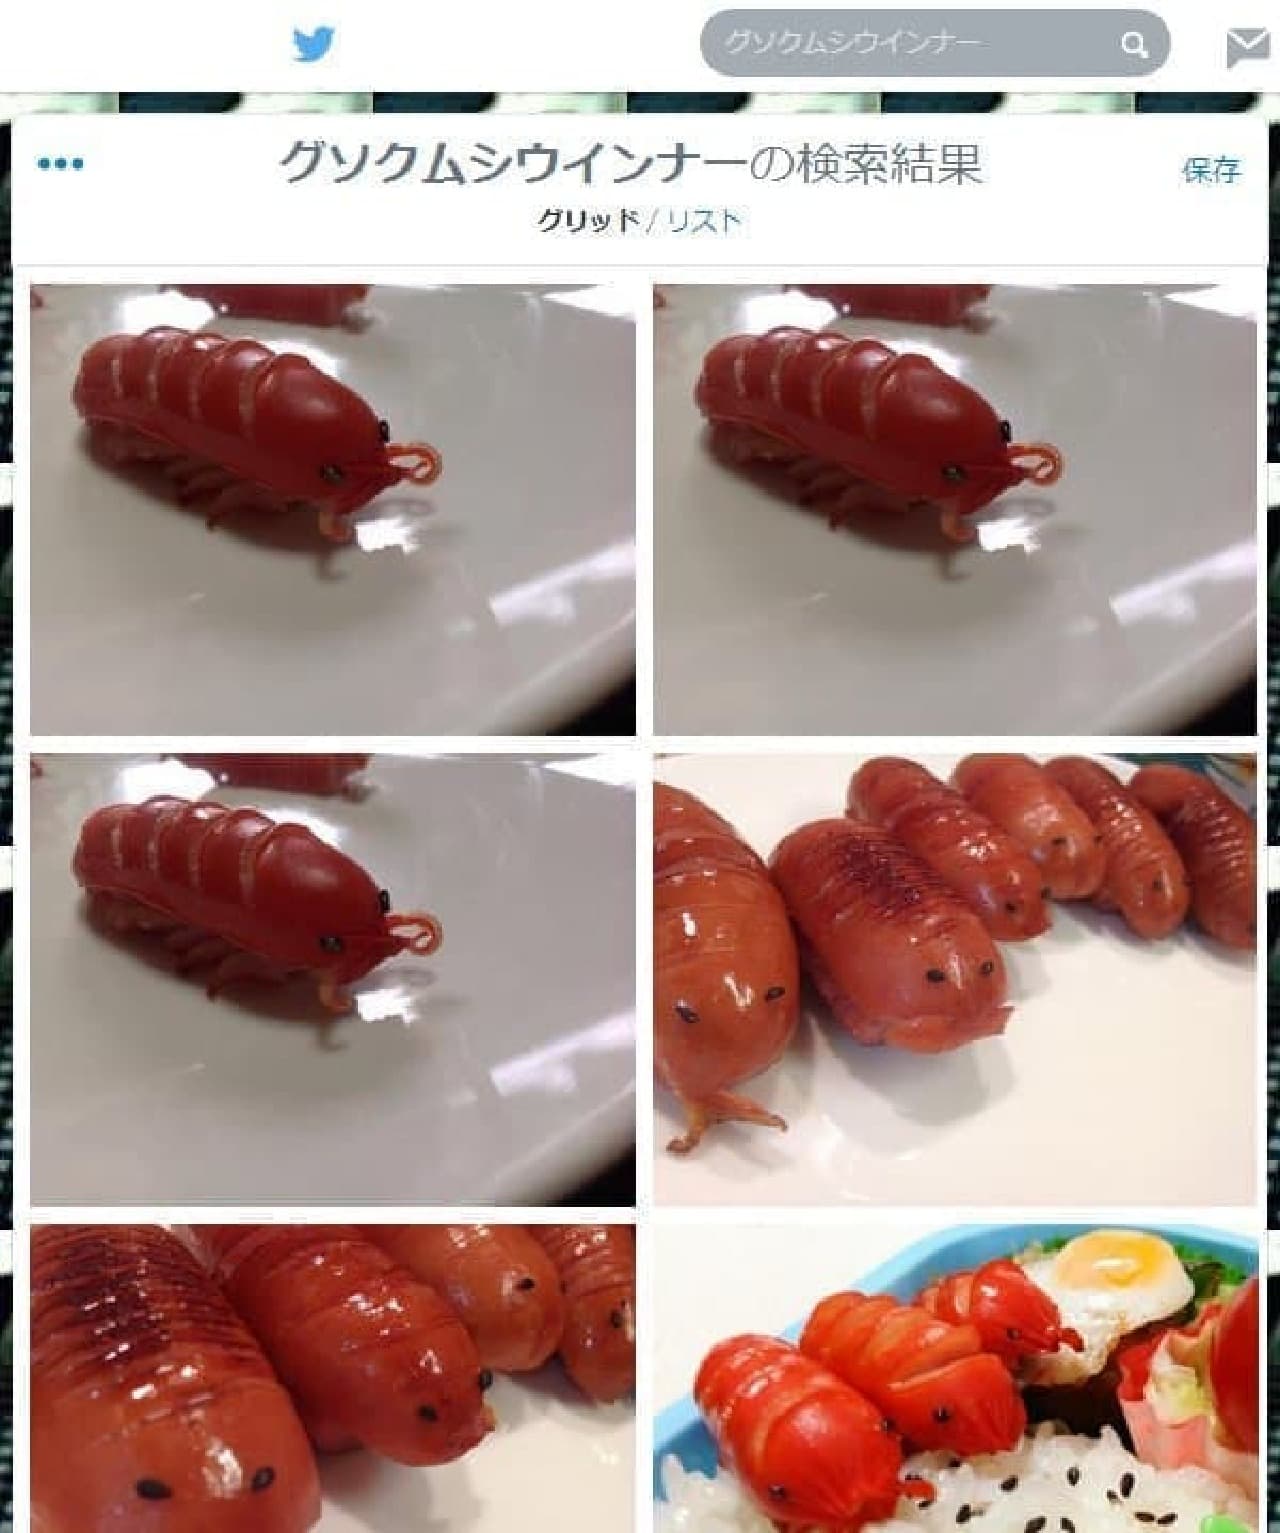 Twitter image search results for "Giant Isopod"